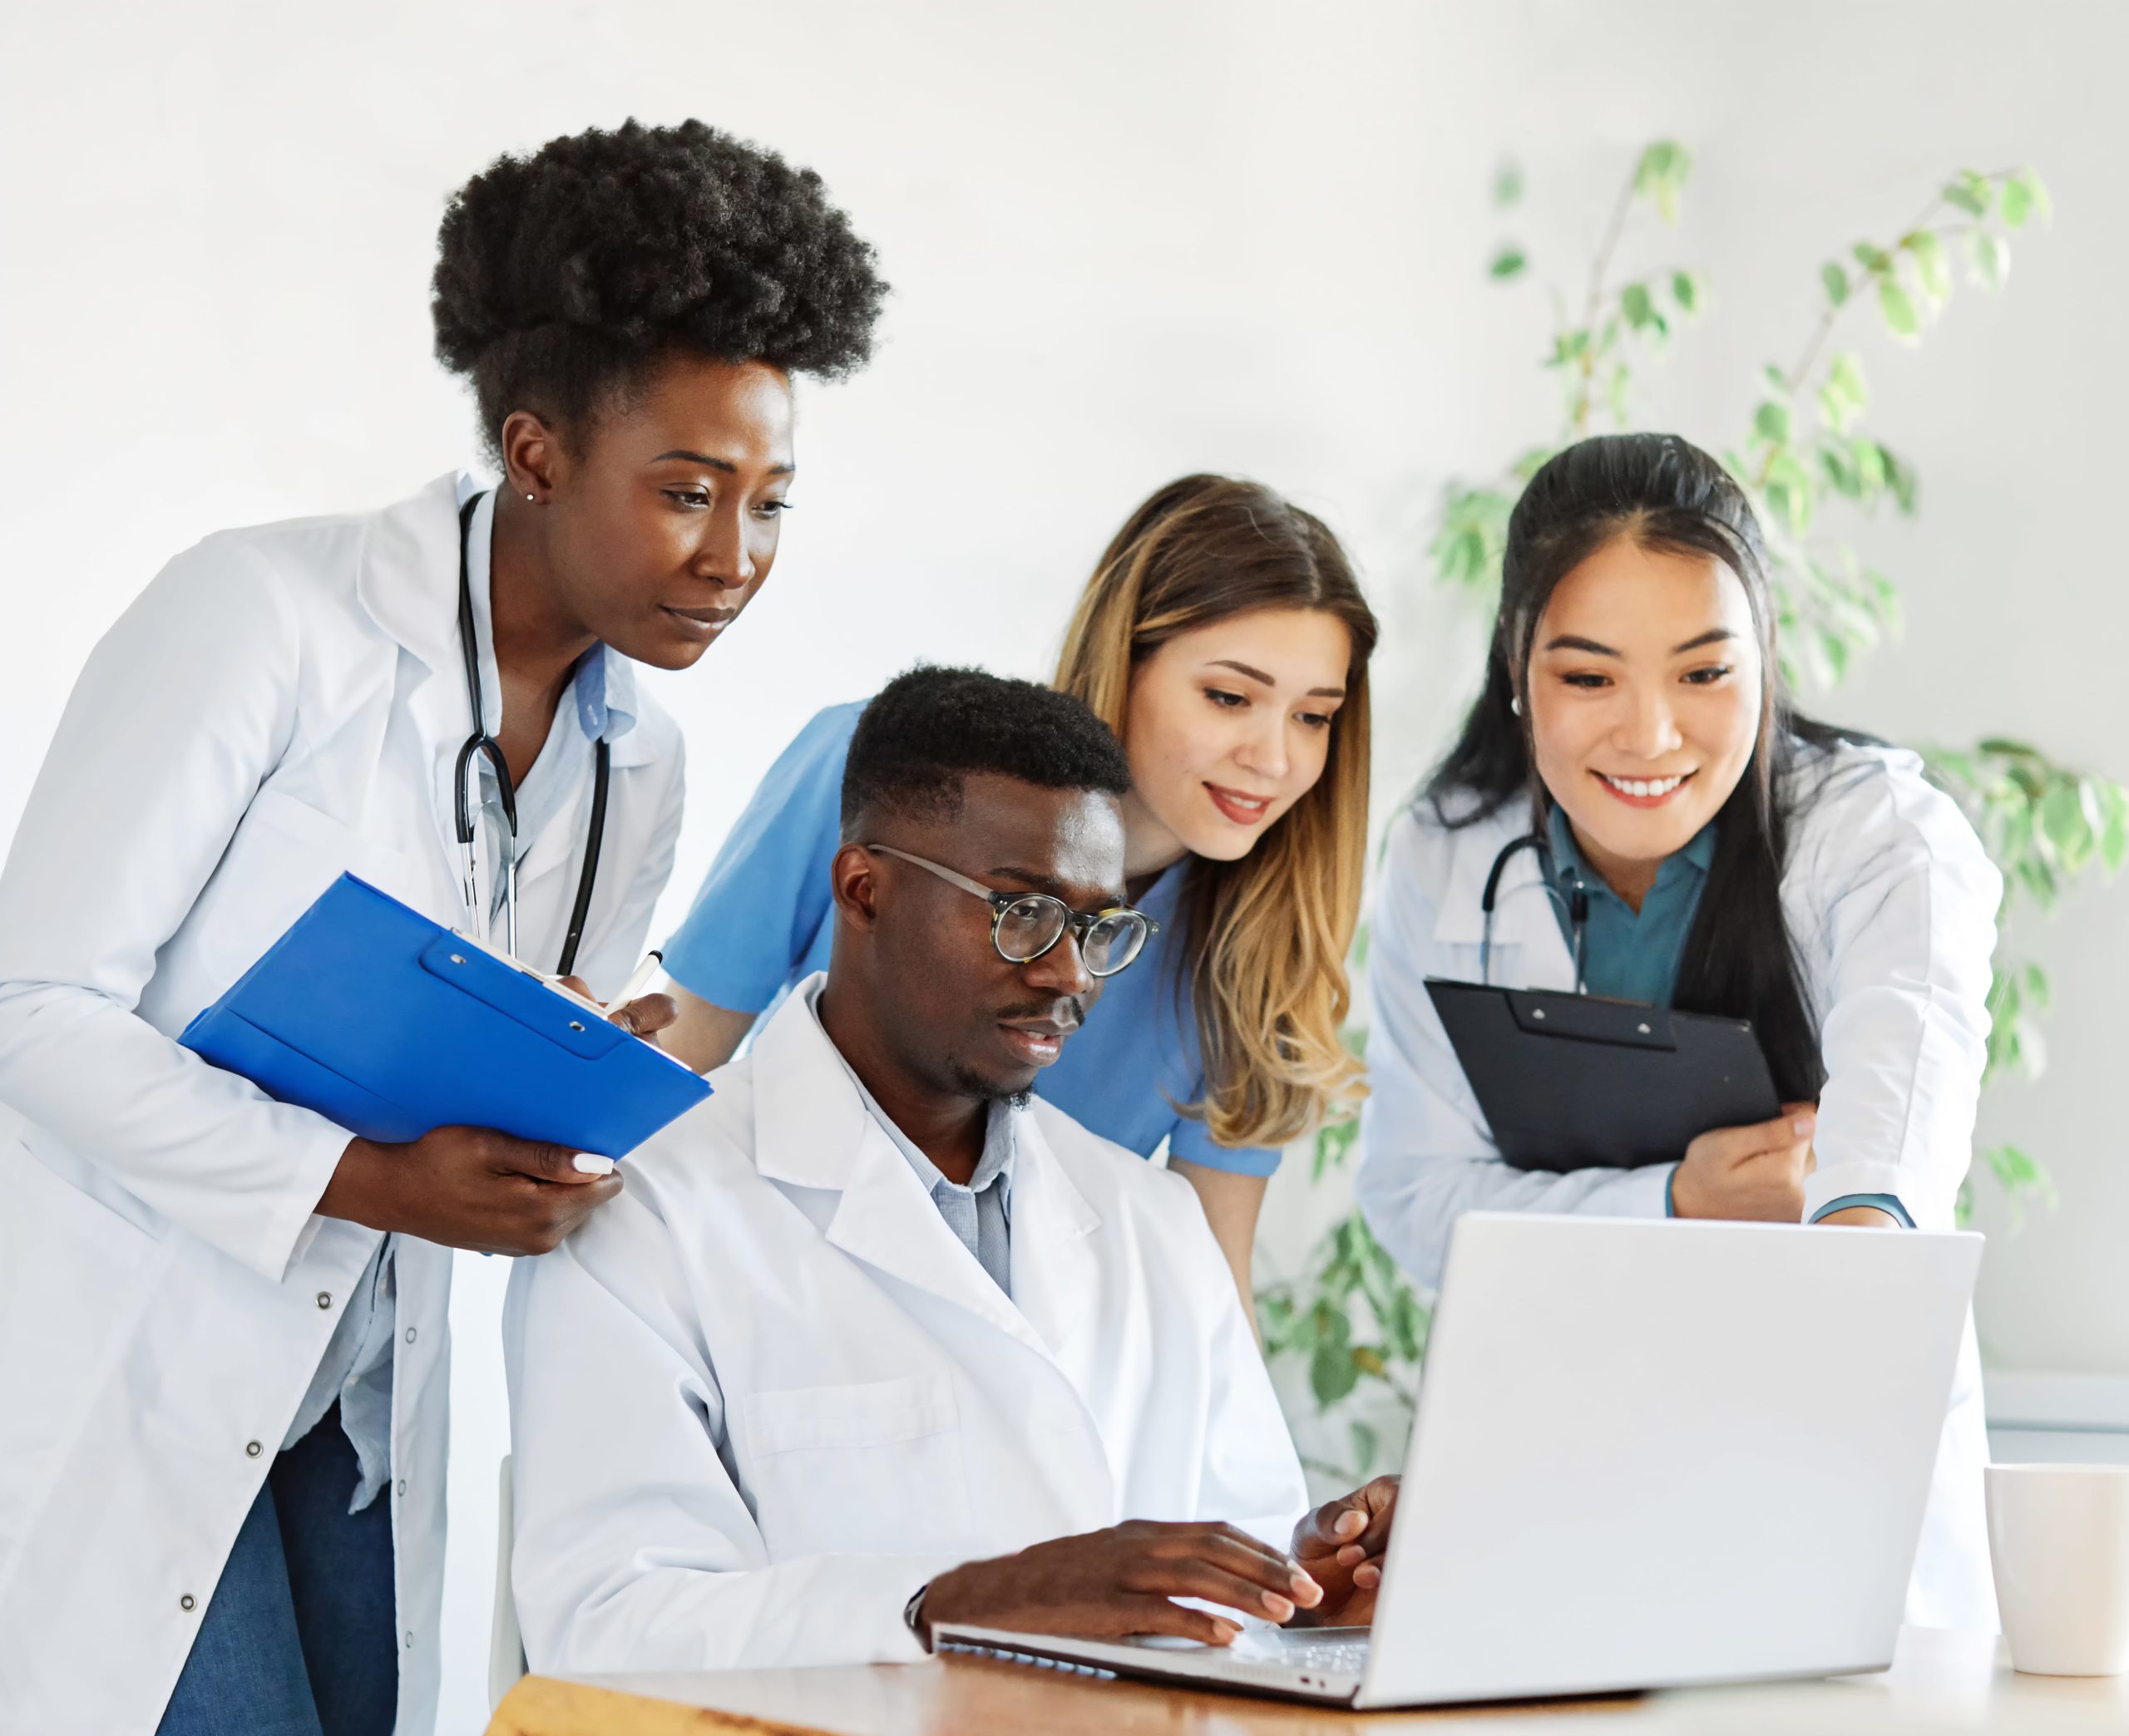 a group of people in white coats looking at a laptop